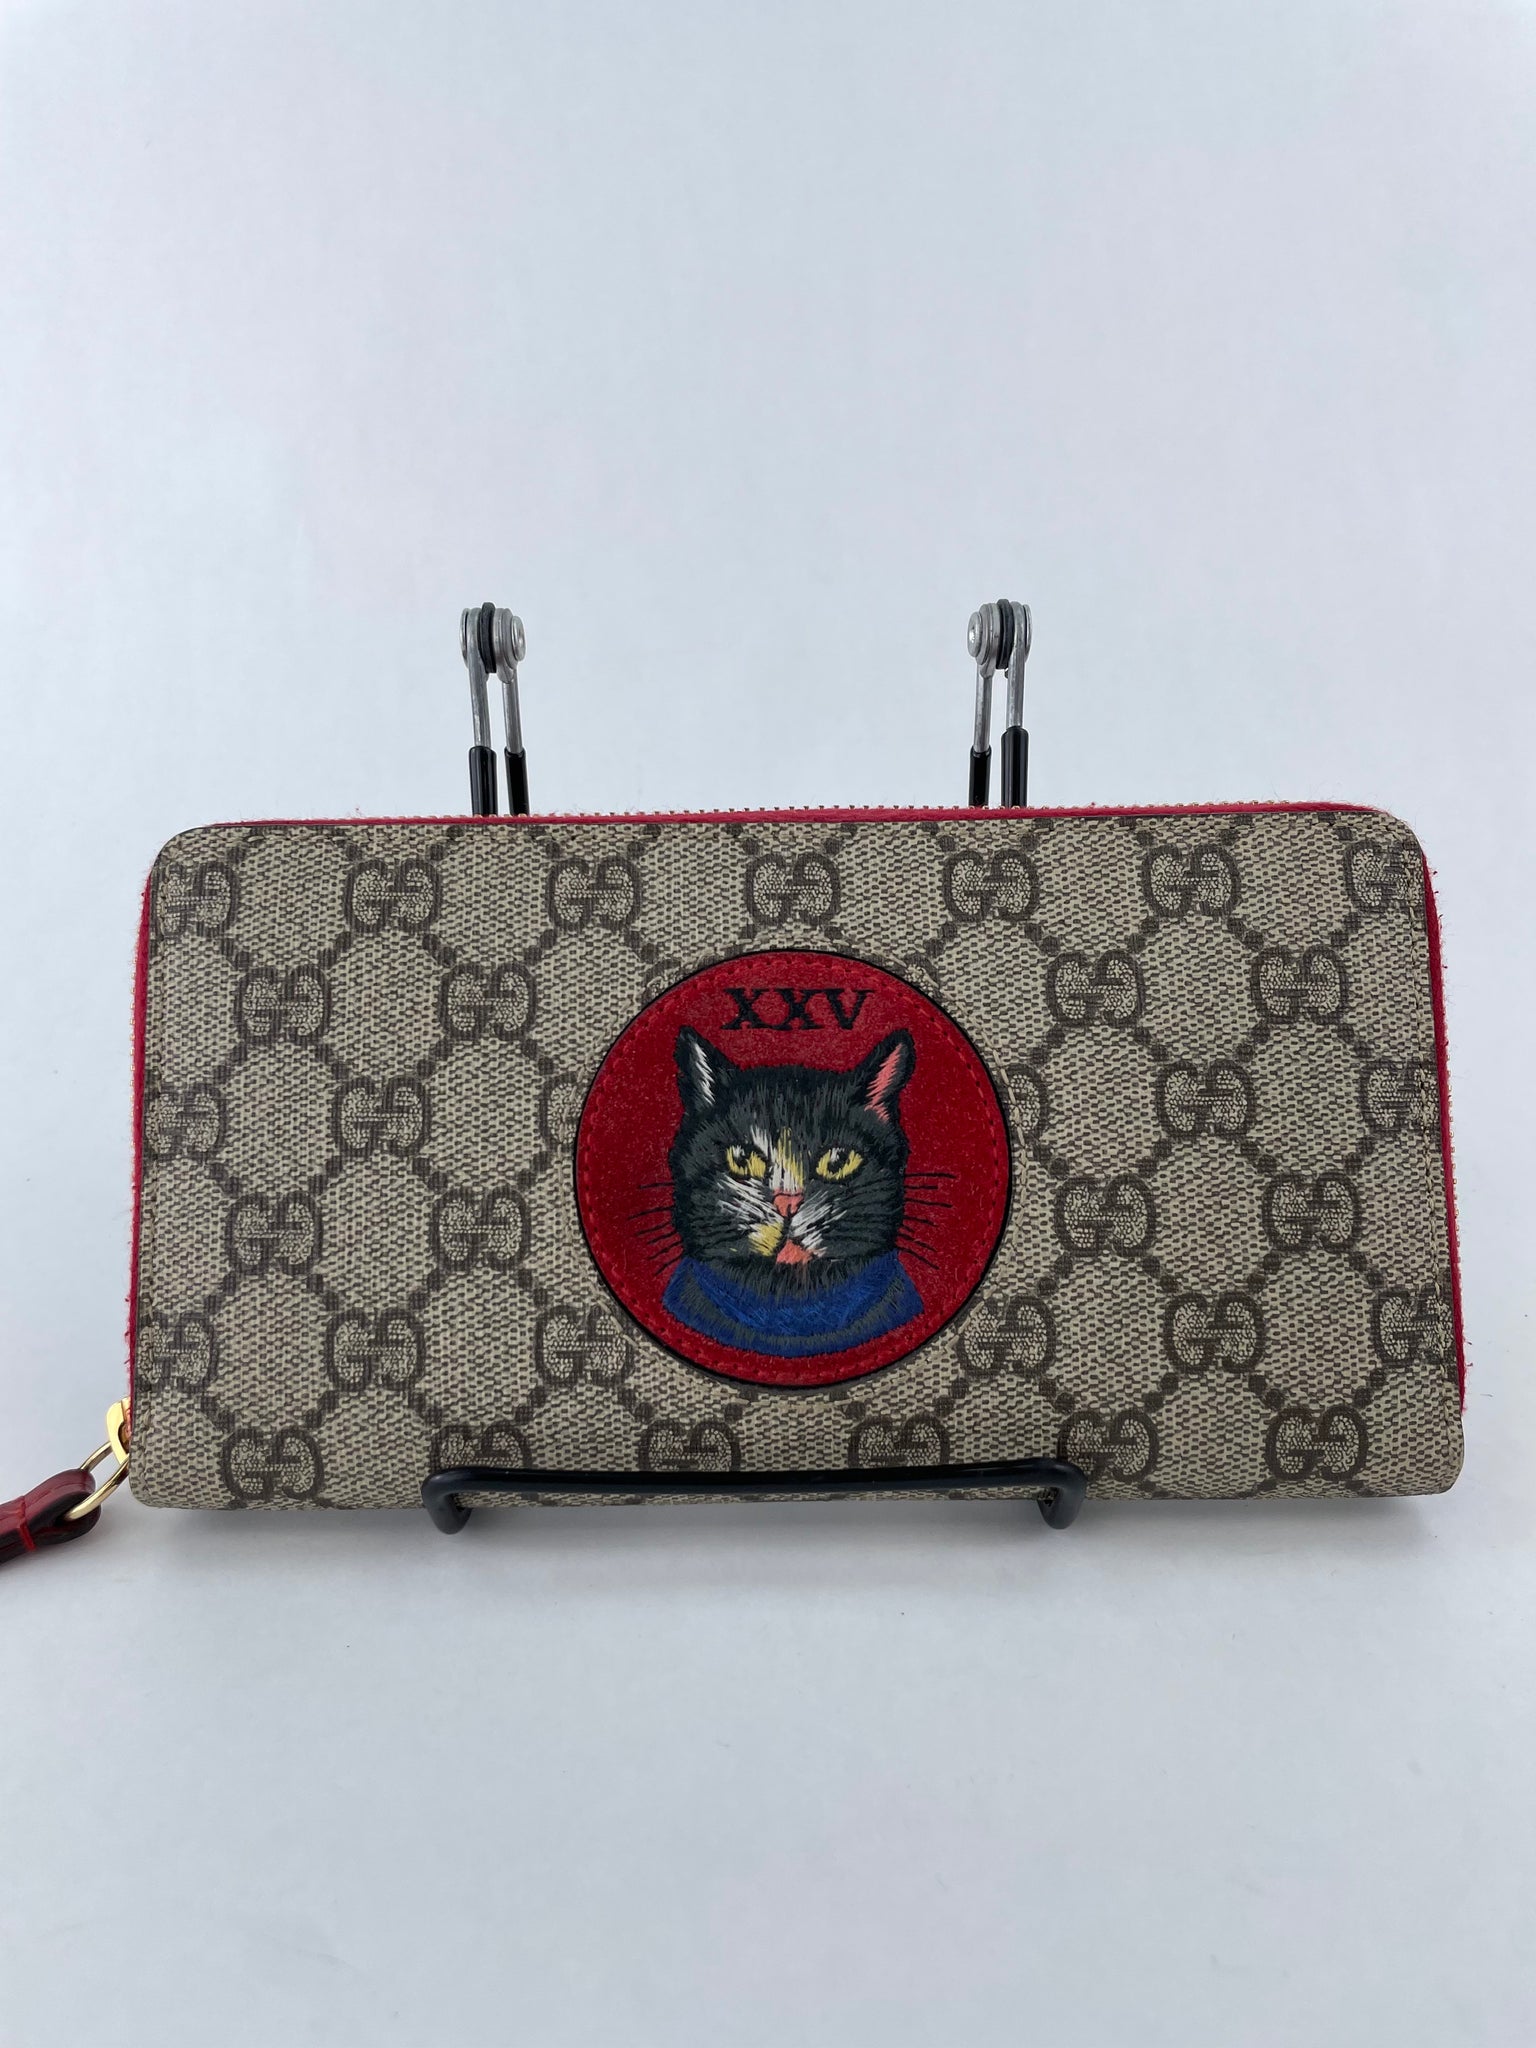 Gucci Beige/Red GG Supreme Limited Edition Bosco Patch Zip Around Wallet  Gucci